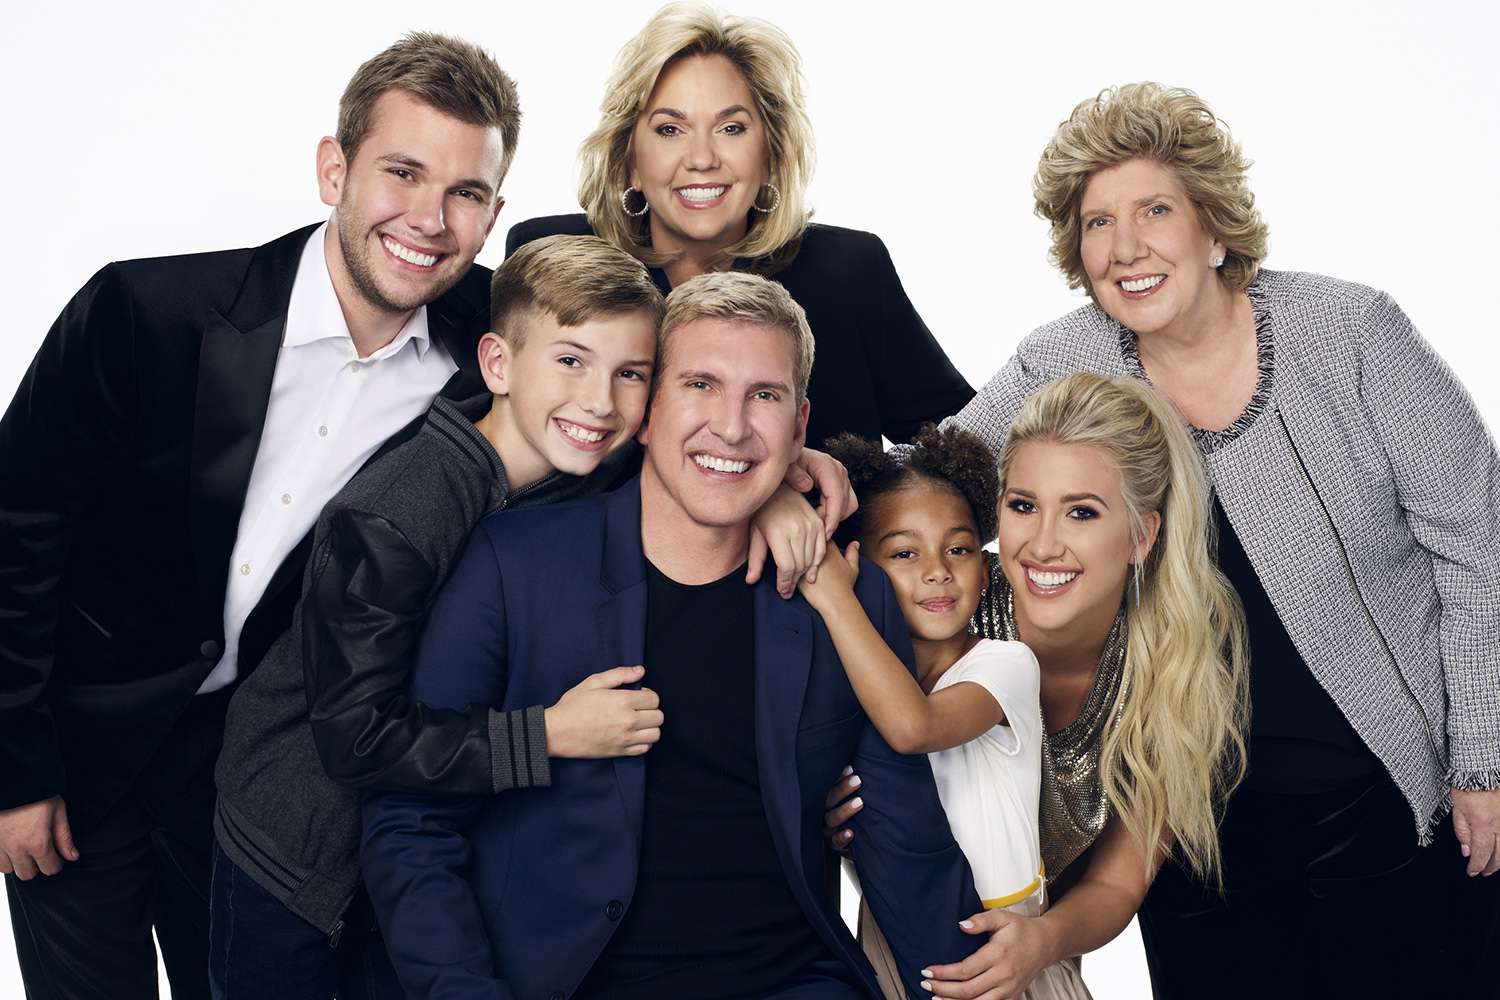 Chloe Chrisley Says Being Adopted By Todd and Julie Chrisley Was the 'Best Day' of Her Life